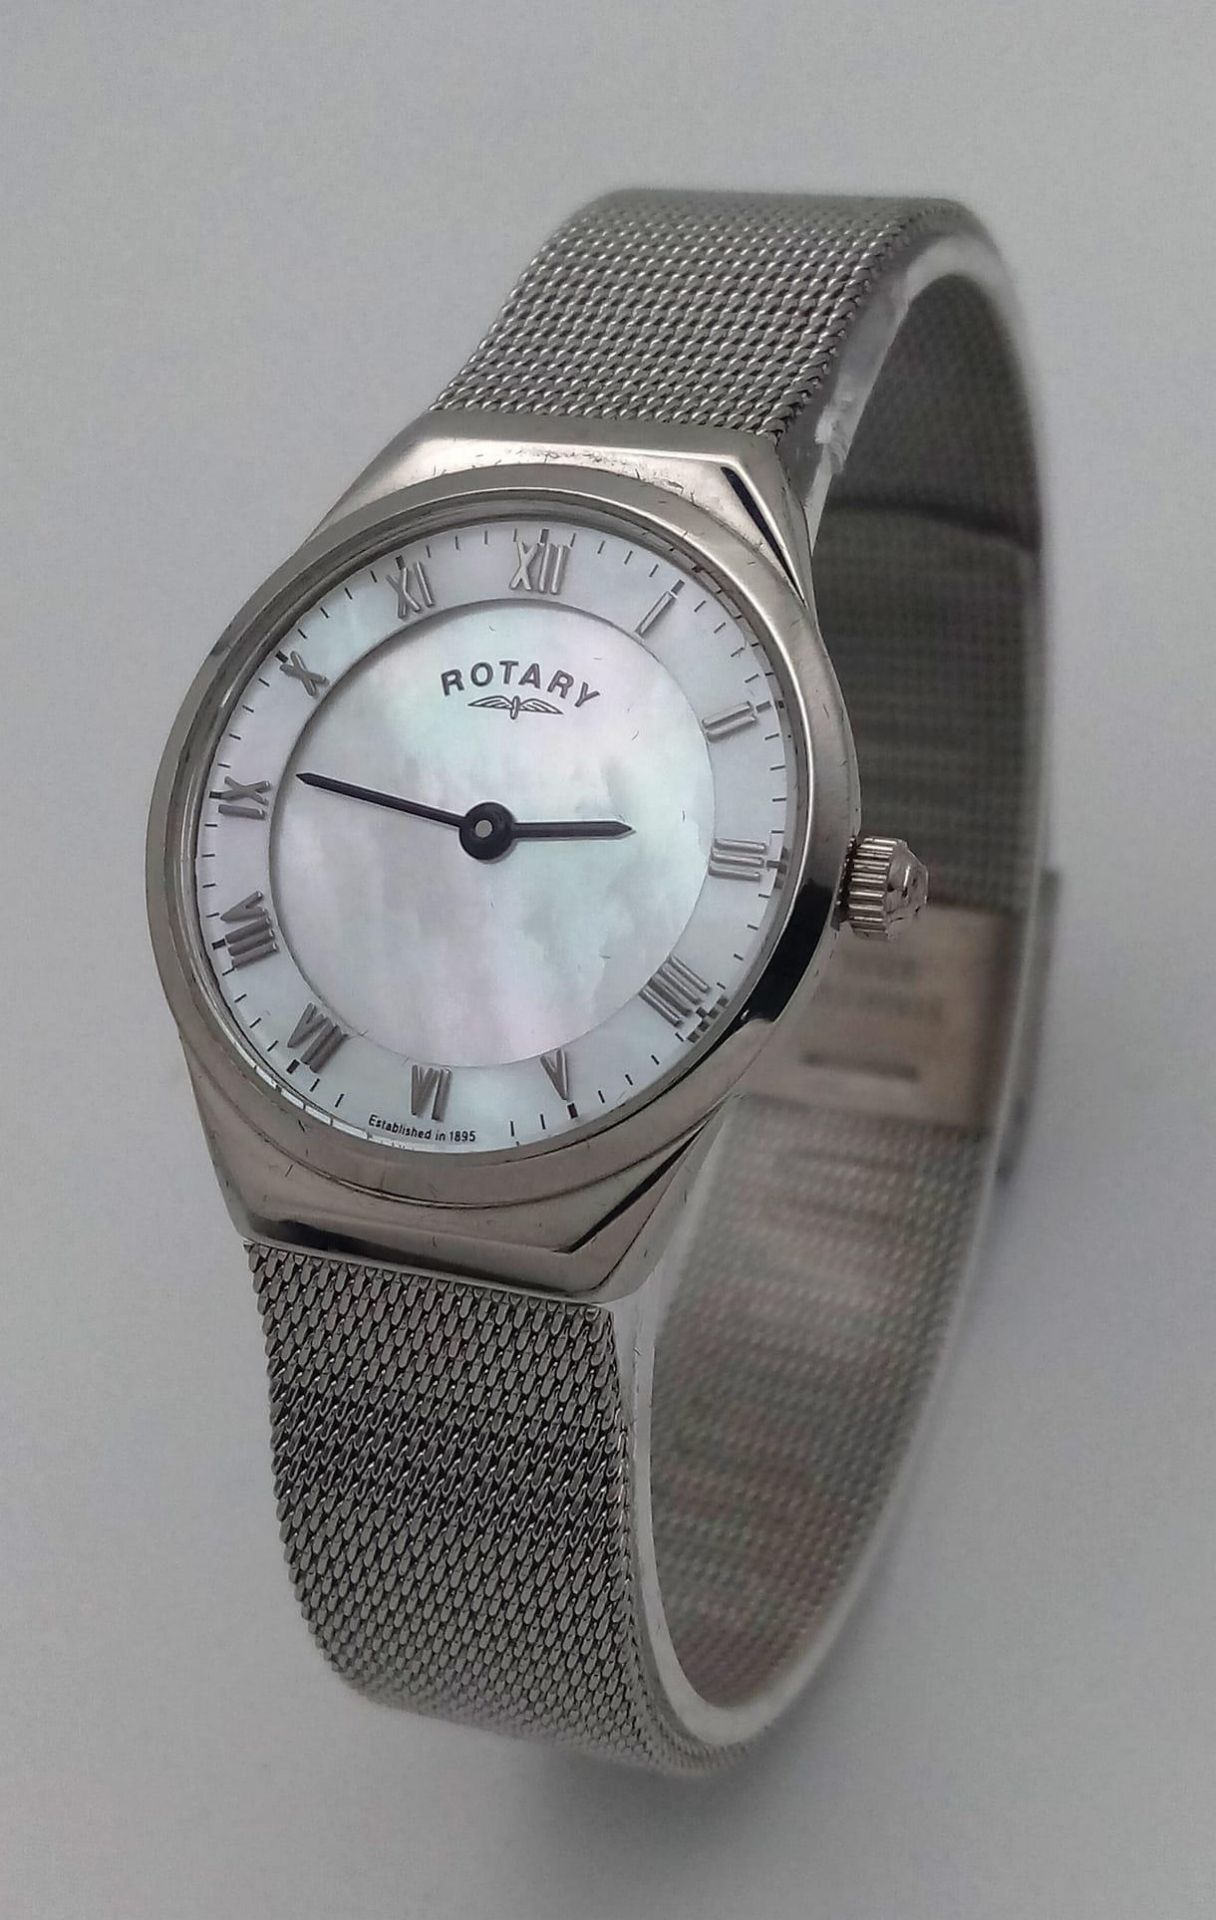 Excellent Condition Ladies Stainless Steel Rotary Quartz Watch. 30mm wide. New Battery Fitted